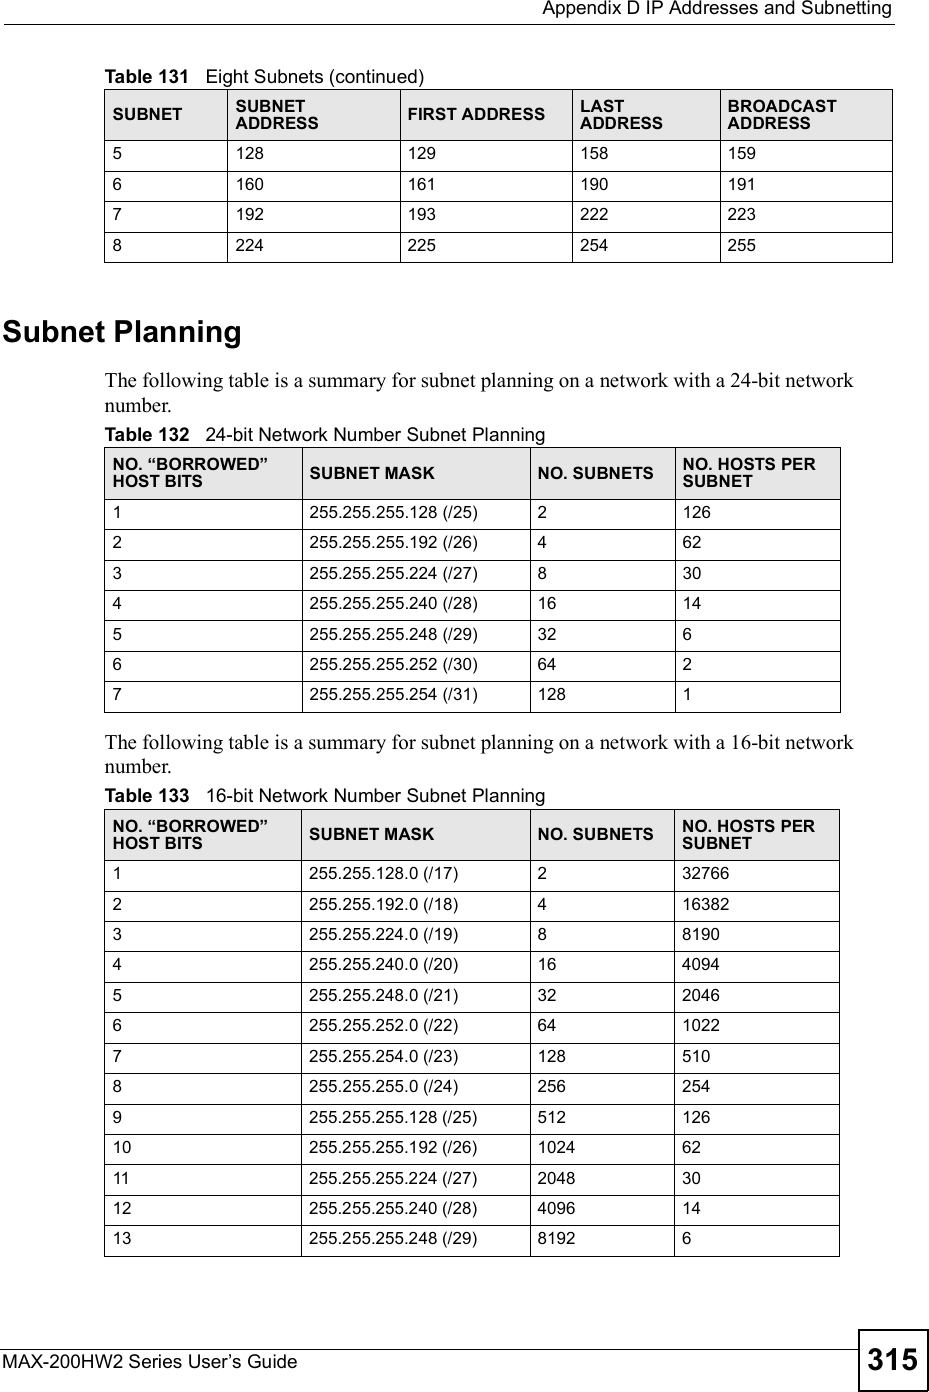  Appendix DIP Addresses and SubnettingMAX-200HW2 Series User s Guide 315Subnet PlanningThe following table is a summary for subnet planning on a network with a 24-bit network number.The following table is a summary for subnet planning on a network with a 16-bit network number. 5128 129 158 1596 160 161 190 1917 192 193 222 2238 224 225 254 255Table 131   Eight Subnets (continued)SUBNET SUBNETADDRESS FIRST ADDRESS LAST ADDRESSBROADCAST ADDRESSTable 132   24-bit Network Number Subnet PlanningNO. &quot;BORROWED# HOST BITS SUBNET MASK NO. SUBNETS NO. HOSTS PER SUBNET1255.255.255.128 (/25) 2 1262 255.255.255.192 (/26) 4 623 255.255.255.224 (/27) 8 304 255.255.255.240 (/28) 16 145 255.255.255.248 (/29) 32 66 255.255.255.252 (/30) 64 27 255.255.255.254 (/31) 128 1Table 133   16-bit Network Number Subnet PlanningNO. &quot;BORROWED# HOST BITS SUBNET MASK NO. SUBNETS NO. HOSTS PER SUBNET1255.255.128.0 (/17) 2 327662 255.255.192.0 (/18) 4 163823 255.255.224.0 (/19) 8 81904 255.255.240.0 (/20) 16 40945 255.255.248.0 (/21) 32 20466 255.255.252.0 (/22) 64 10227 255.255.254.0 (/23) 128 5108 255.255.255.0 (/24) 256 2549 255.255.255.128 (/25) 512 12610 255.255.255.192 (/26) 1024 6211 255.255.255.224 (/27) 2048 3012 255.255.255.240 (/28) 4096 1413 255.255.255.248 (/29) 8192 6